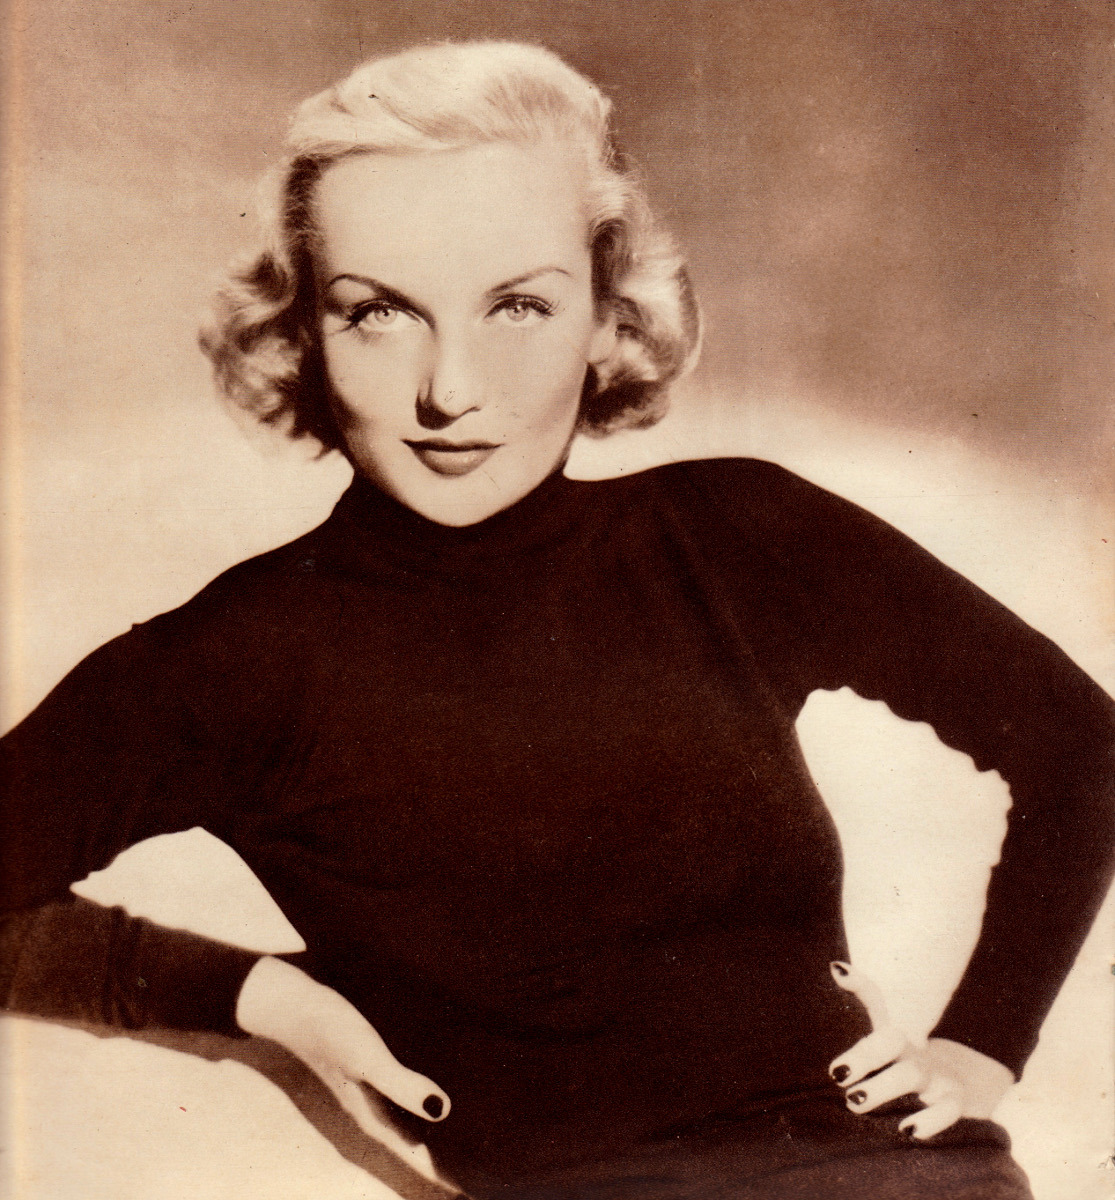 Carole Lombard, from the Daily Express Film Book, edited by Ernest Betts (Daily